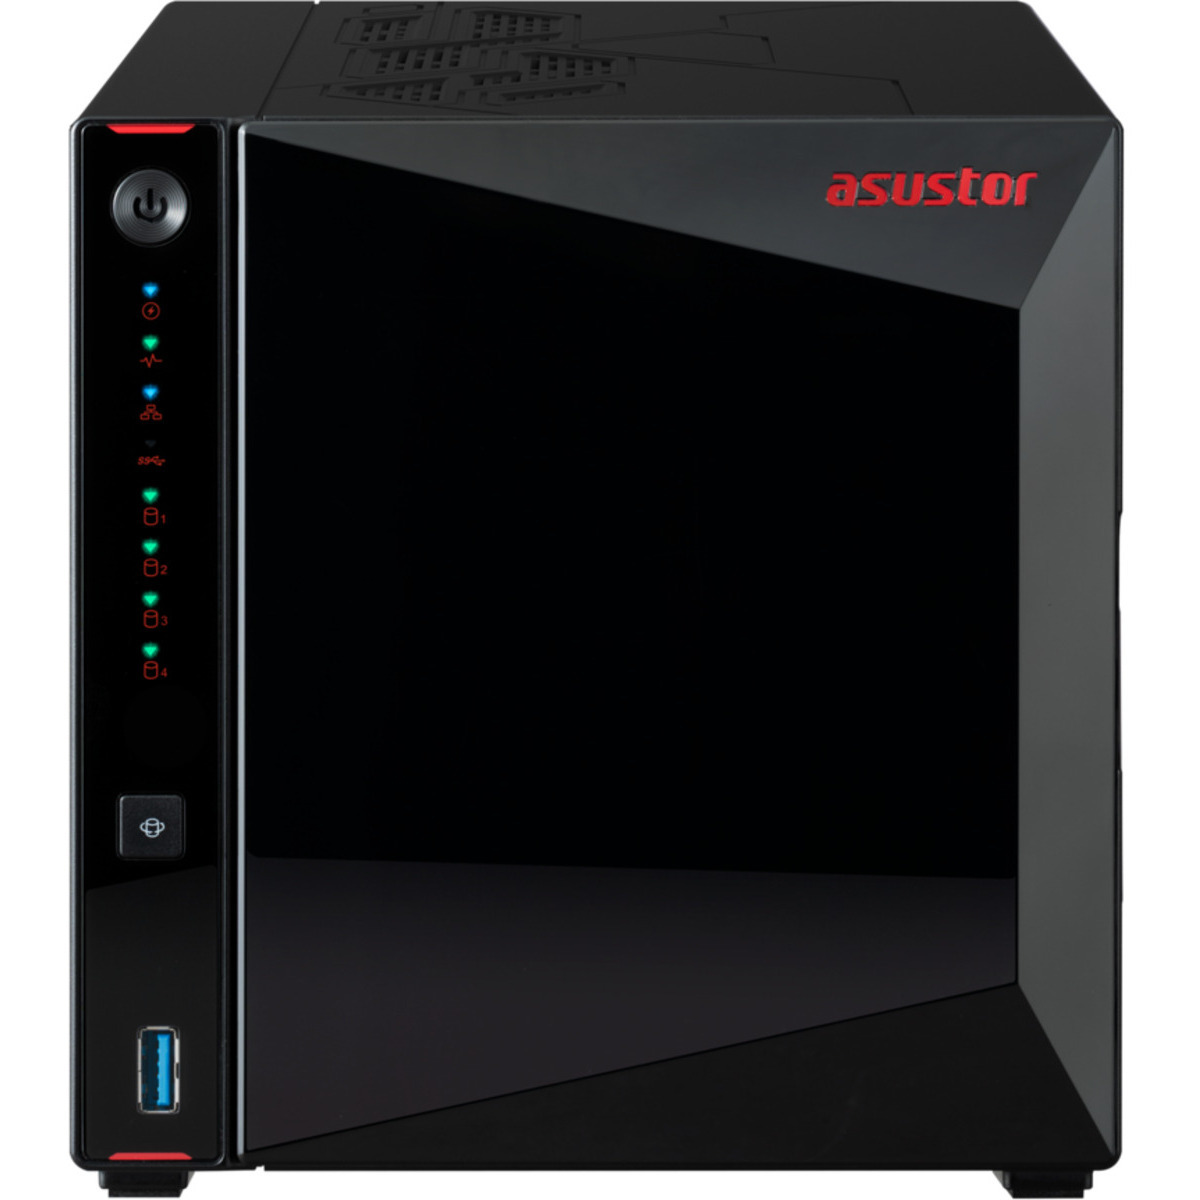 ASUSTOR AS5404T NAS - Network Attached Storage Device Burn-In Tested Configurations - FREE RAM UPGRADE